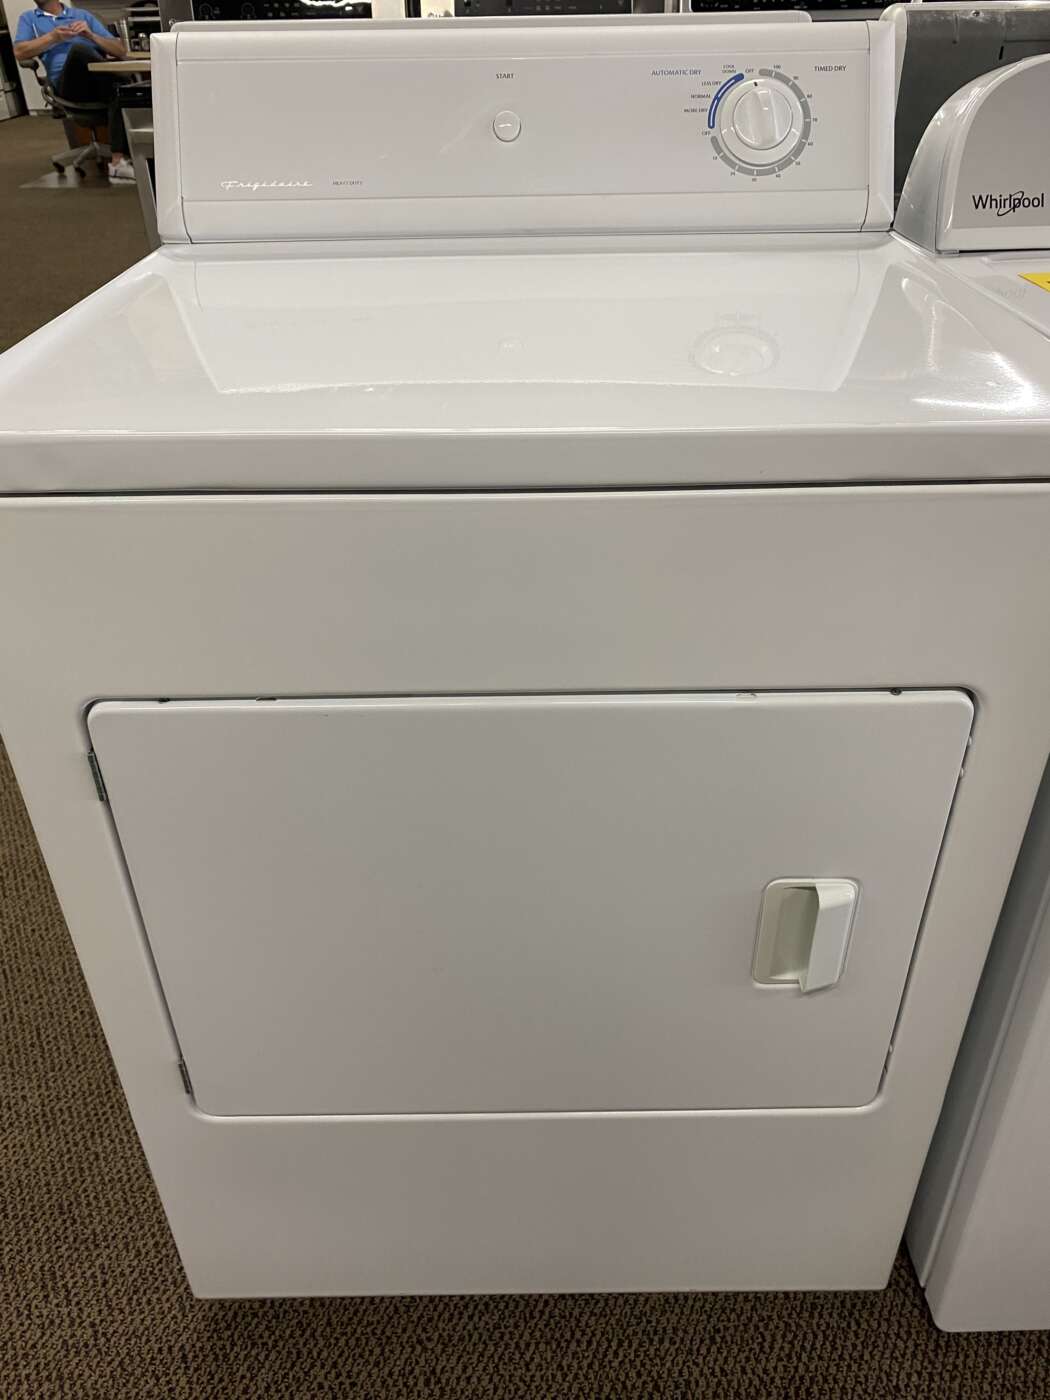 Reconditioned FRIGIDAIRE 5.7 Cu. Ft. Electric Dryer – White